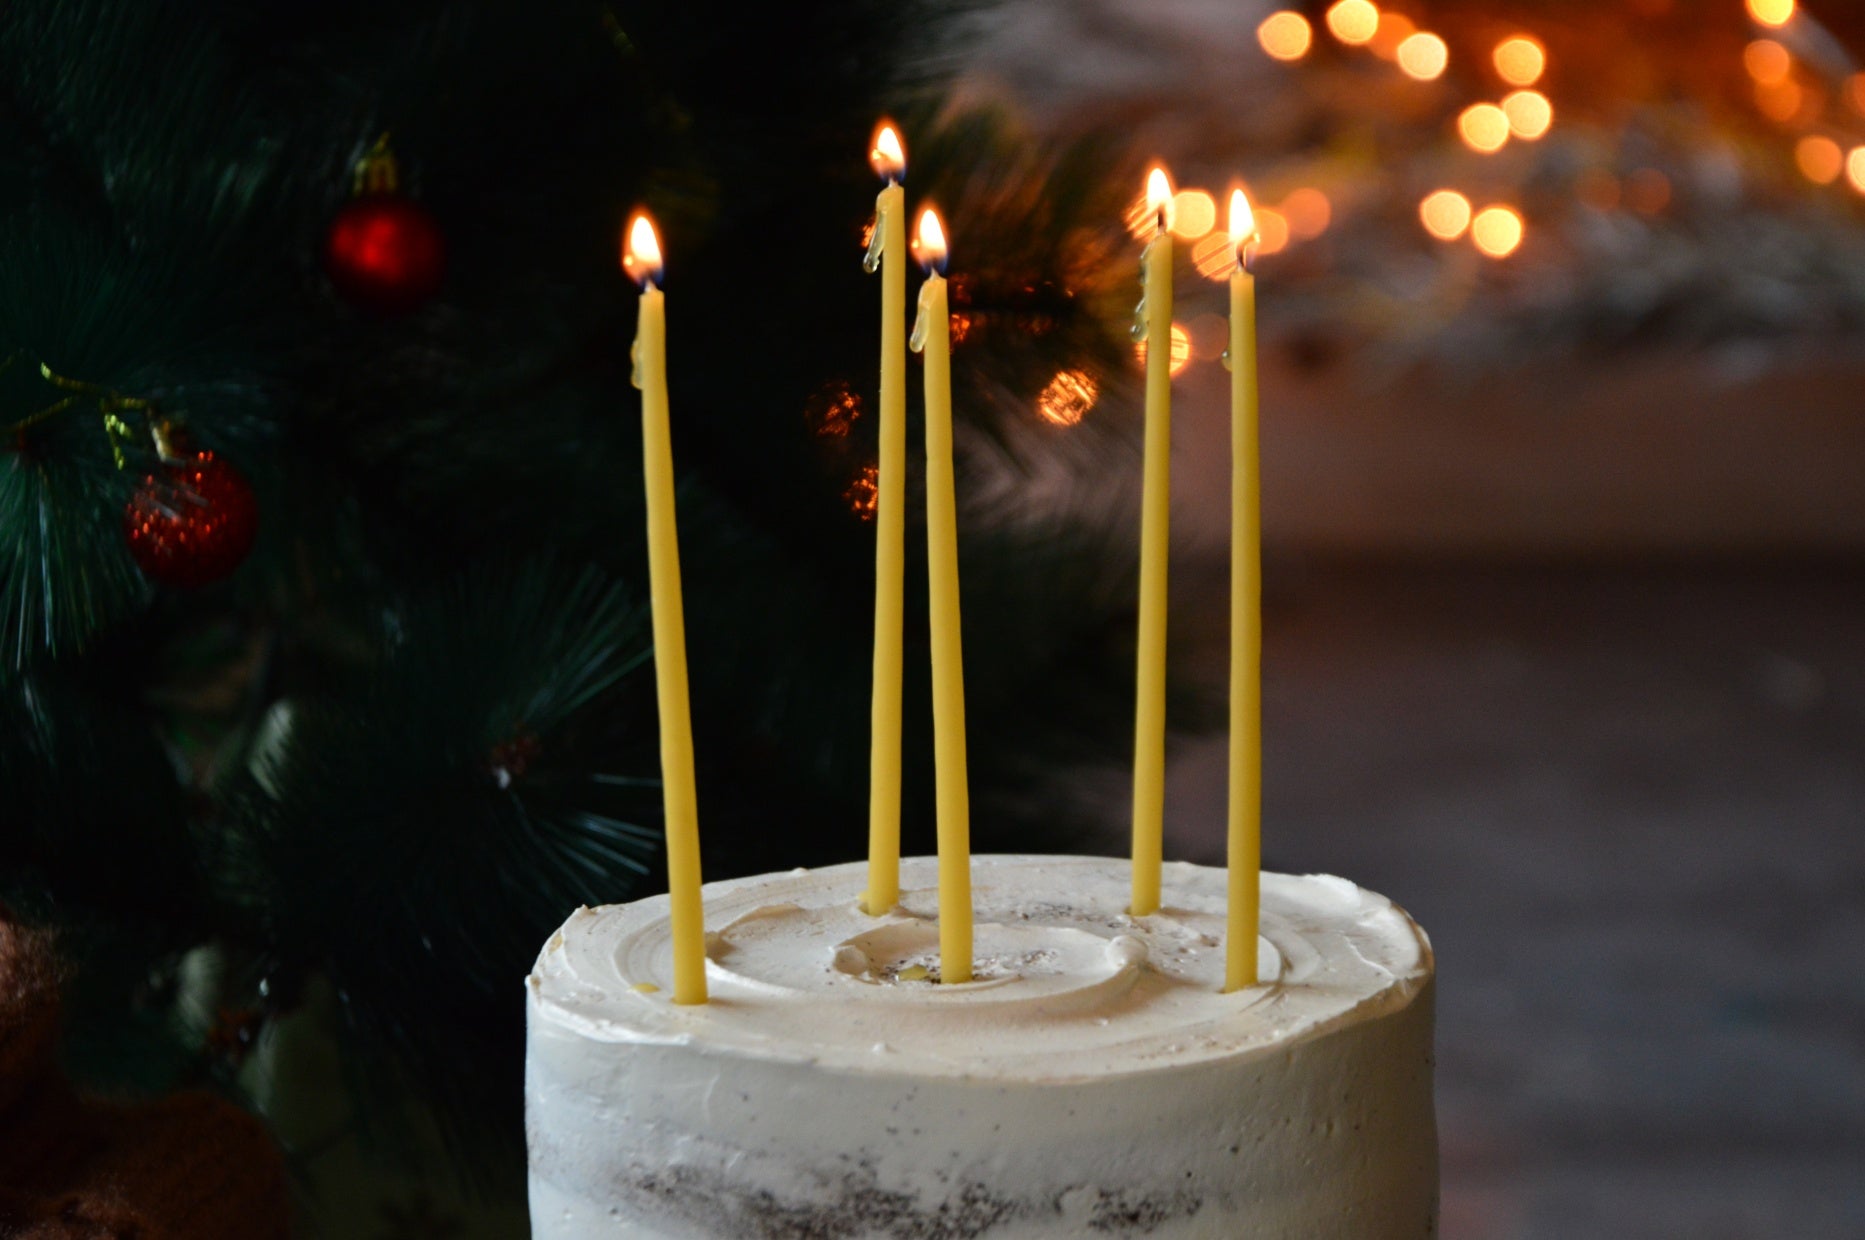 Beeswax Hand Dipped Candles for Cakes